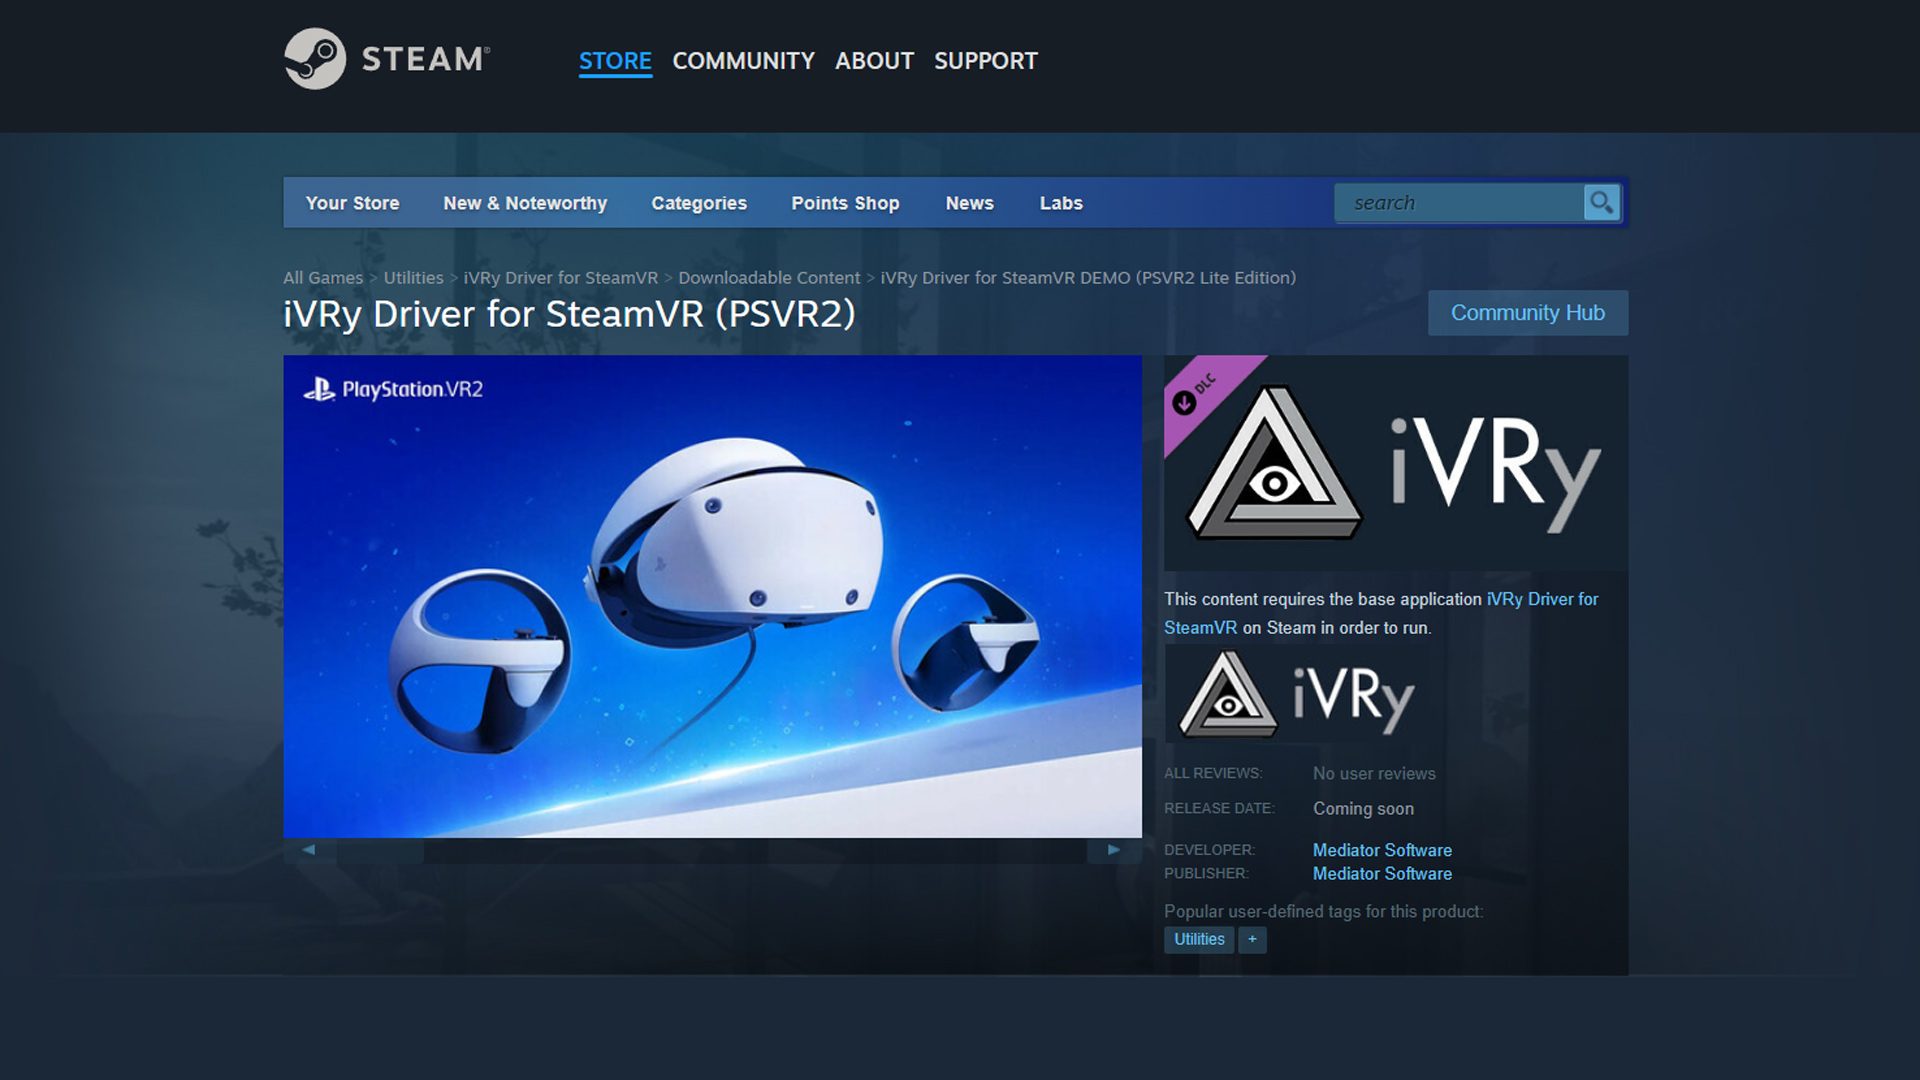 Unofficial SteamVR Driver for PSVR 2 to Release Soon as Sony Plans its Own PC VR Support